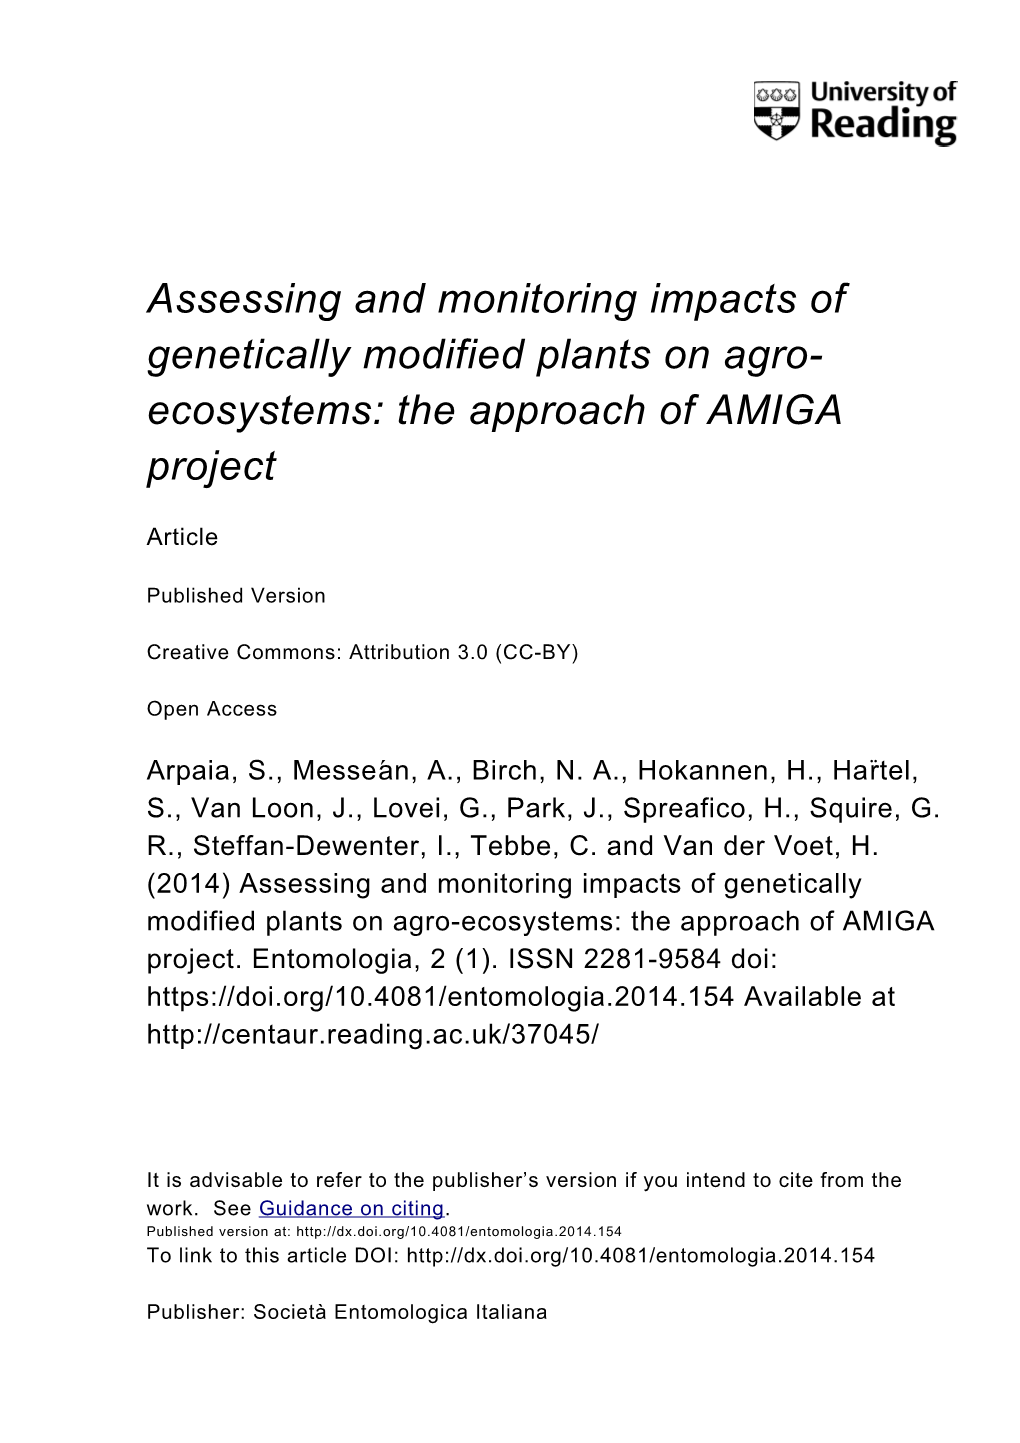 Assessing and Monitoring Impacts of Genetically Modified Plants on Agro- Ecosystems: the Approach of AMIGA Project